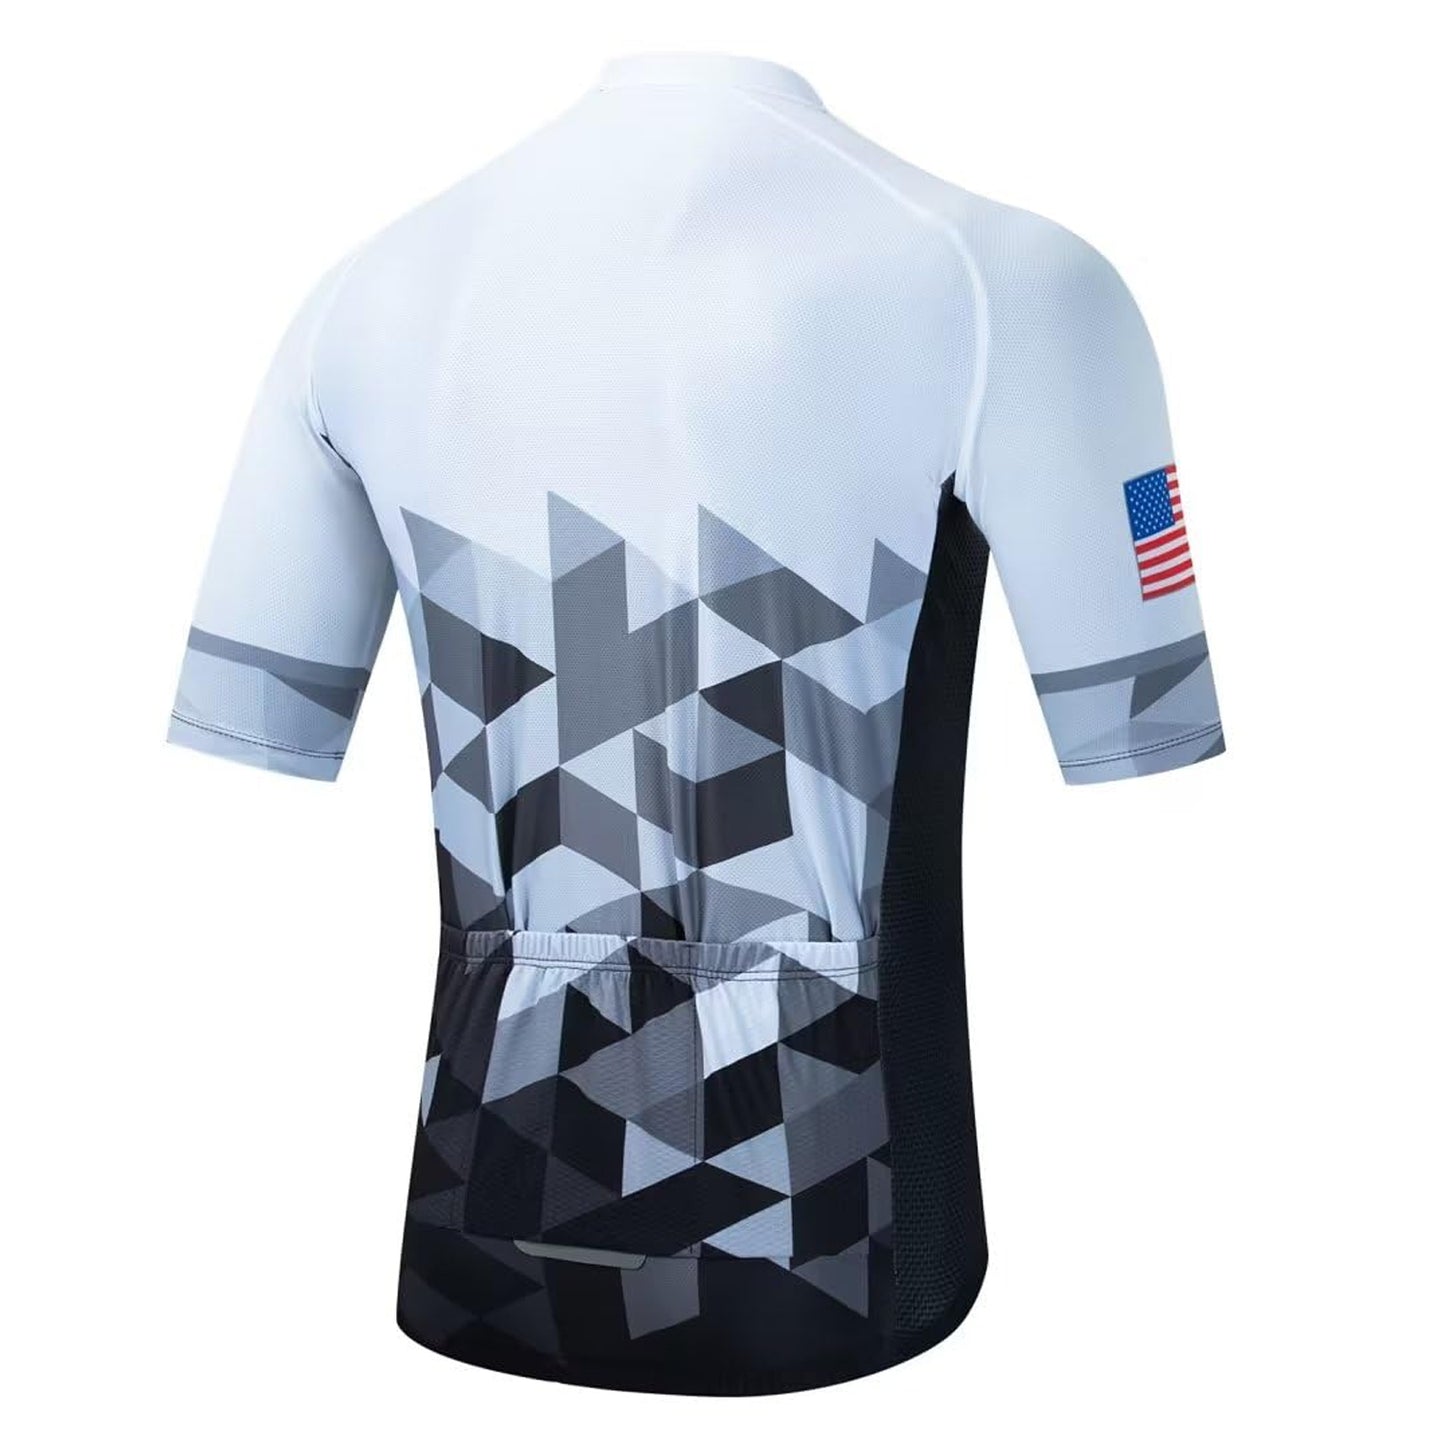 The USA Funny MTB Short Sleeve Cycling Jersey Top